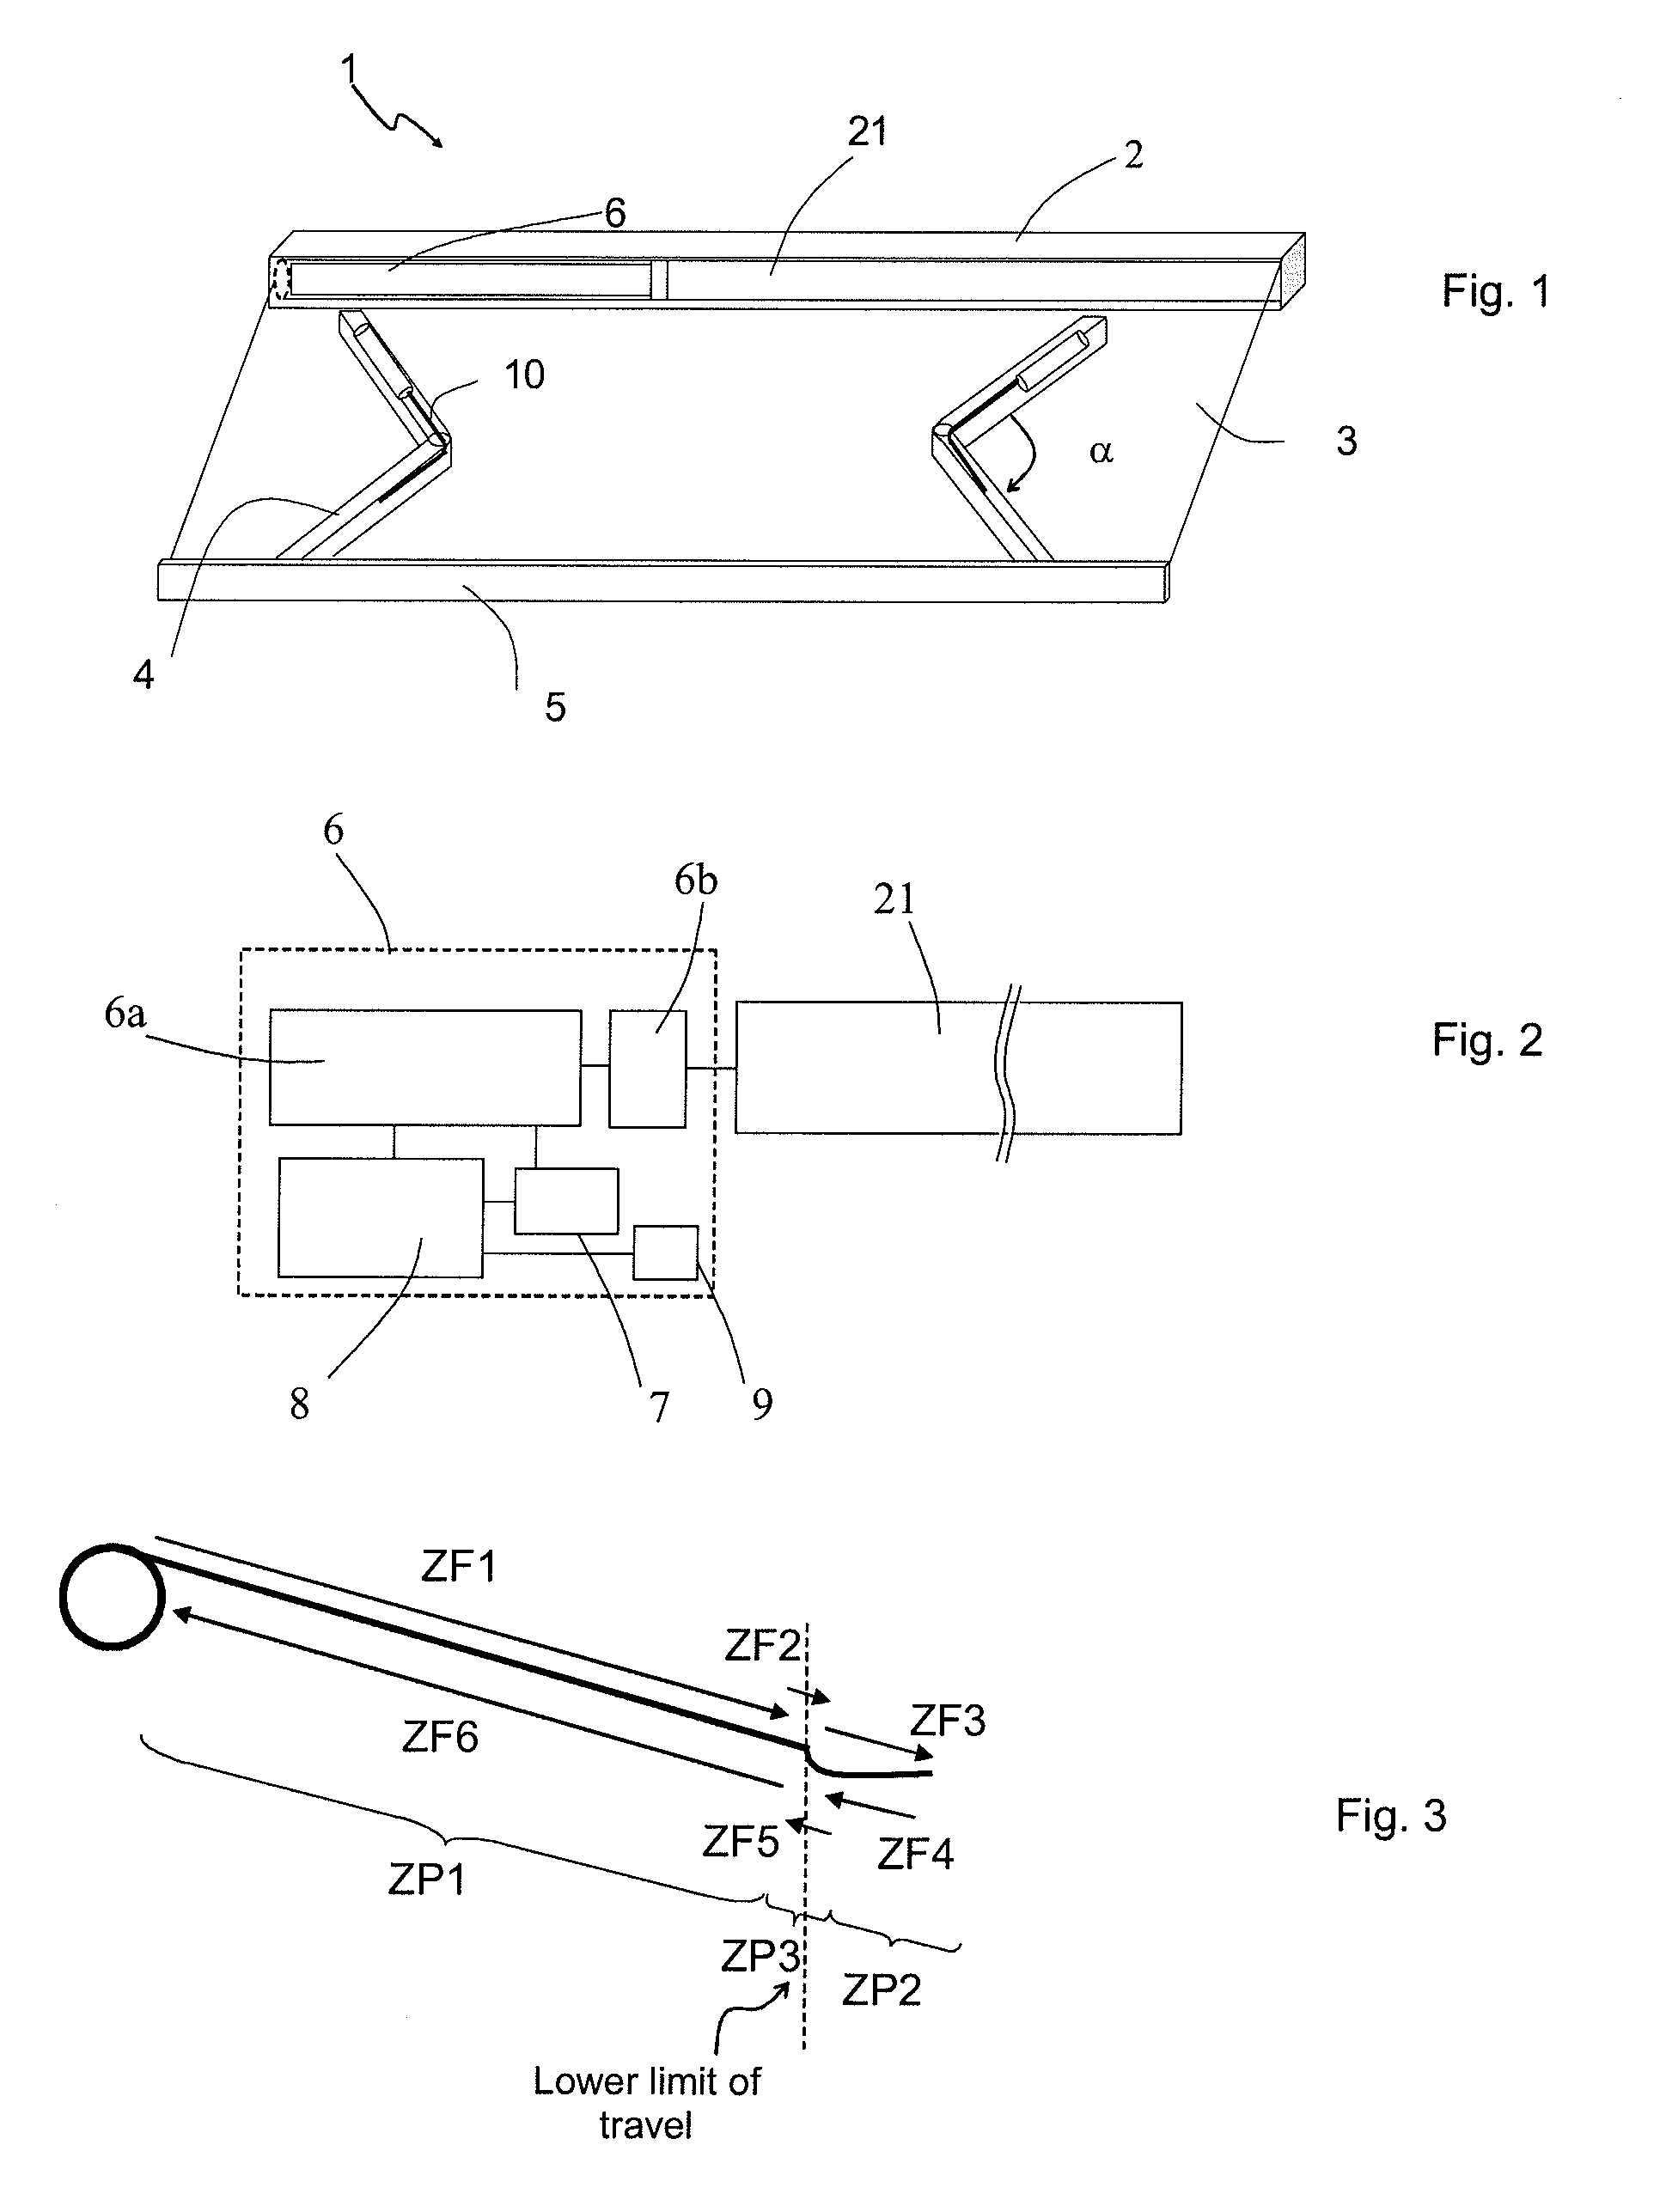 Method of operation for an electromechanical actuator for an awning with arms